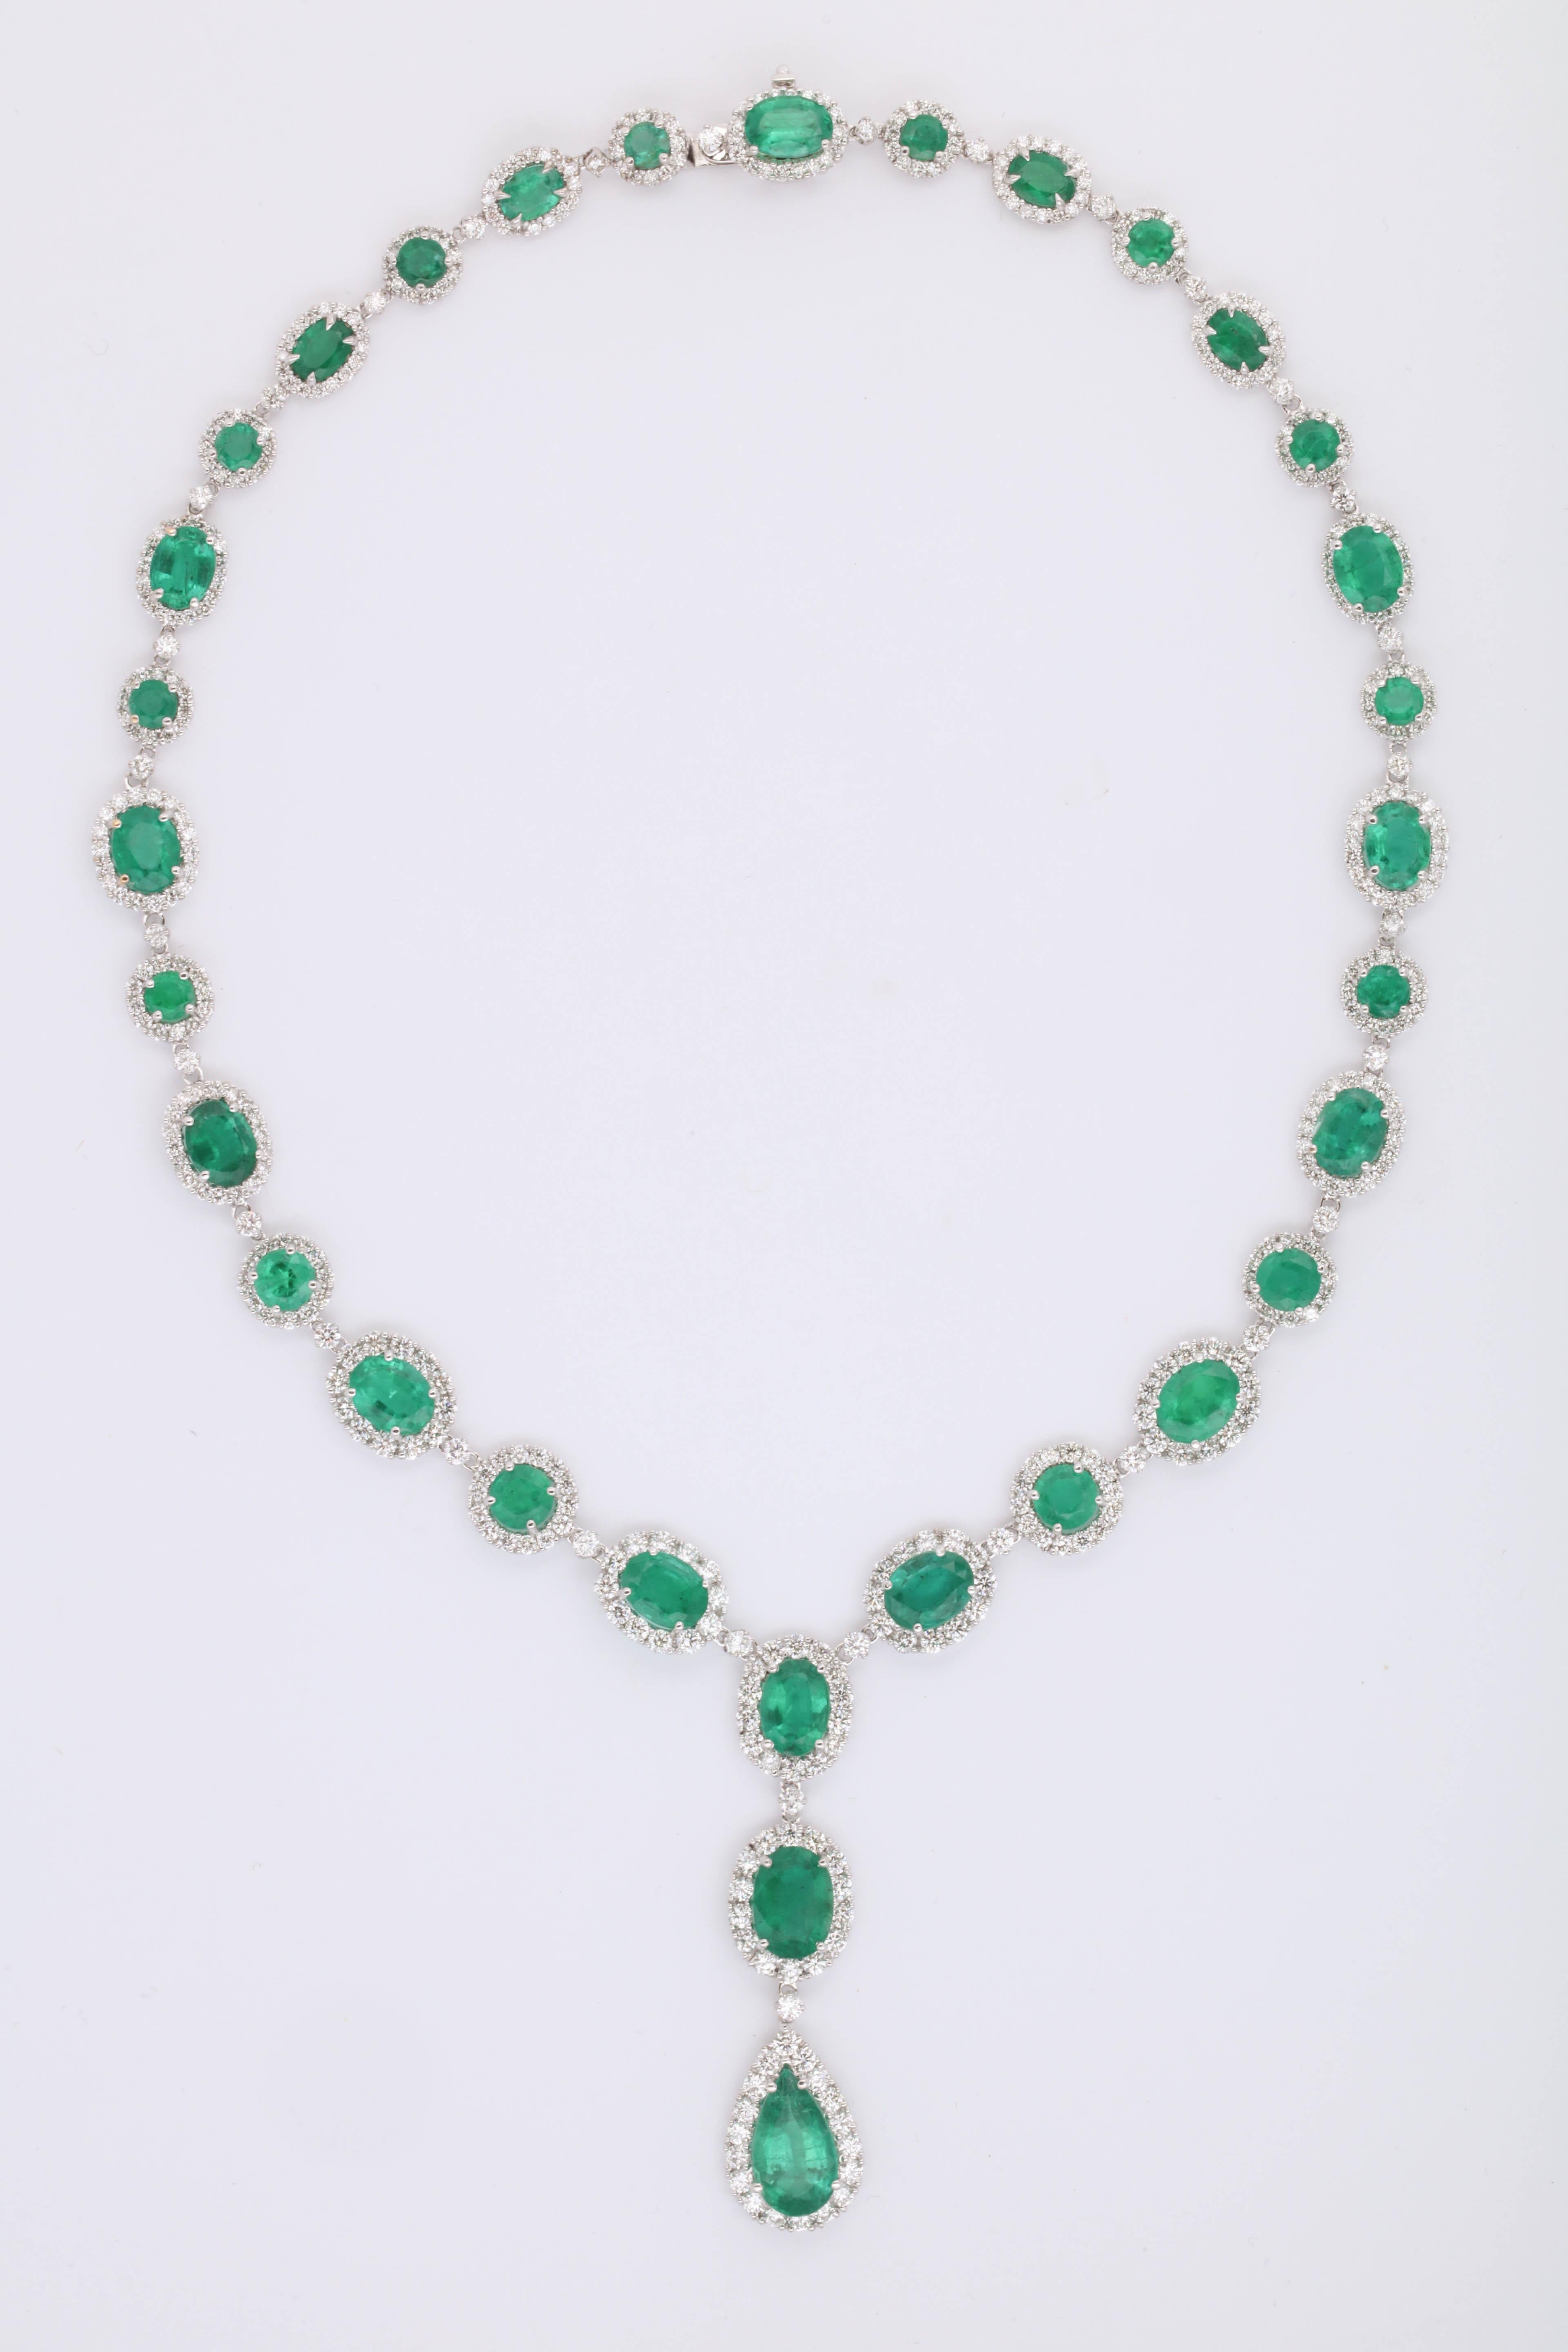 
A classic and elegant Green Emerald and diamond necklace featuring round, oval and pear shape green emeralds. 

41.75 carats of fine green emerald.

15.14 carats of white, round brilliant cut diamonds.

18k white gold 

17 inch length with just